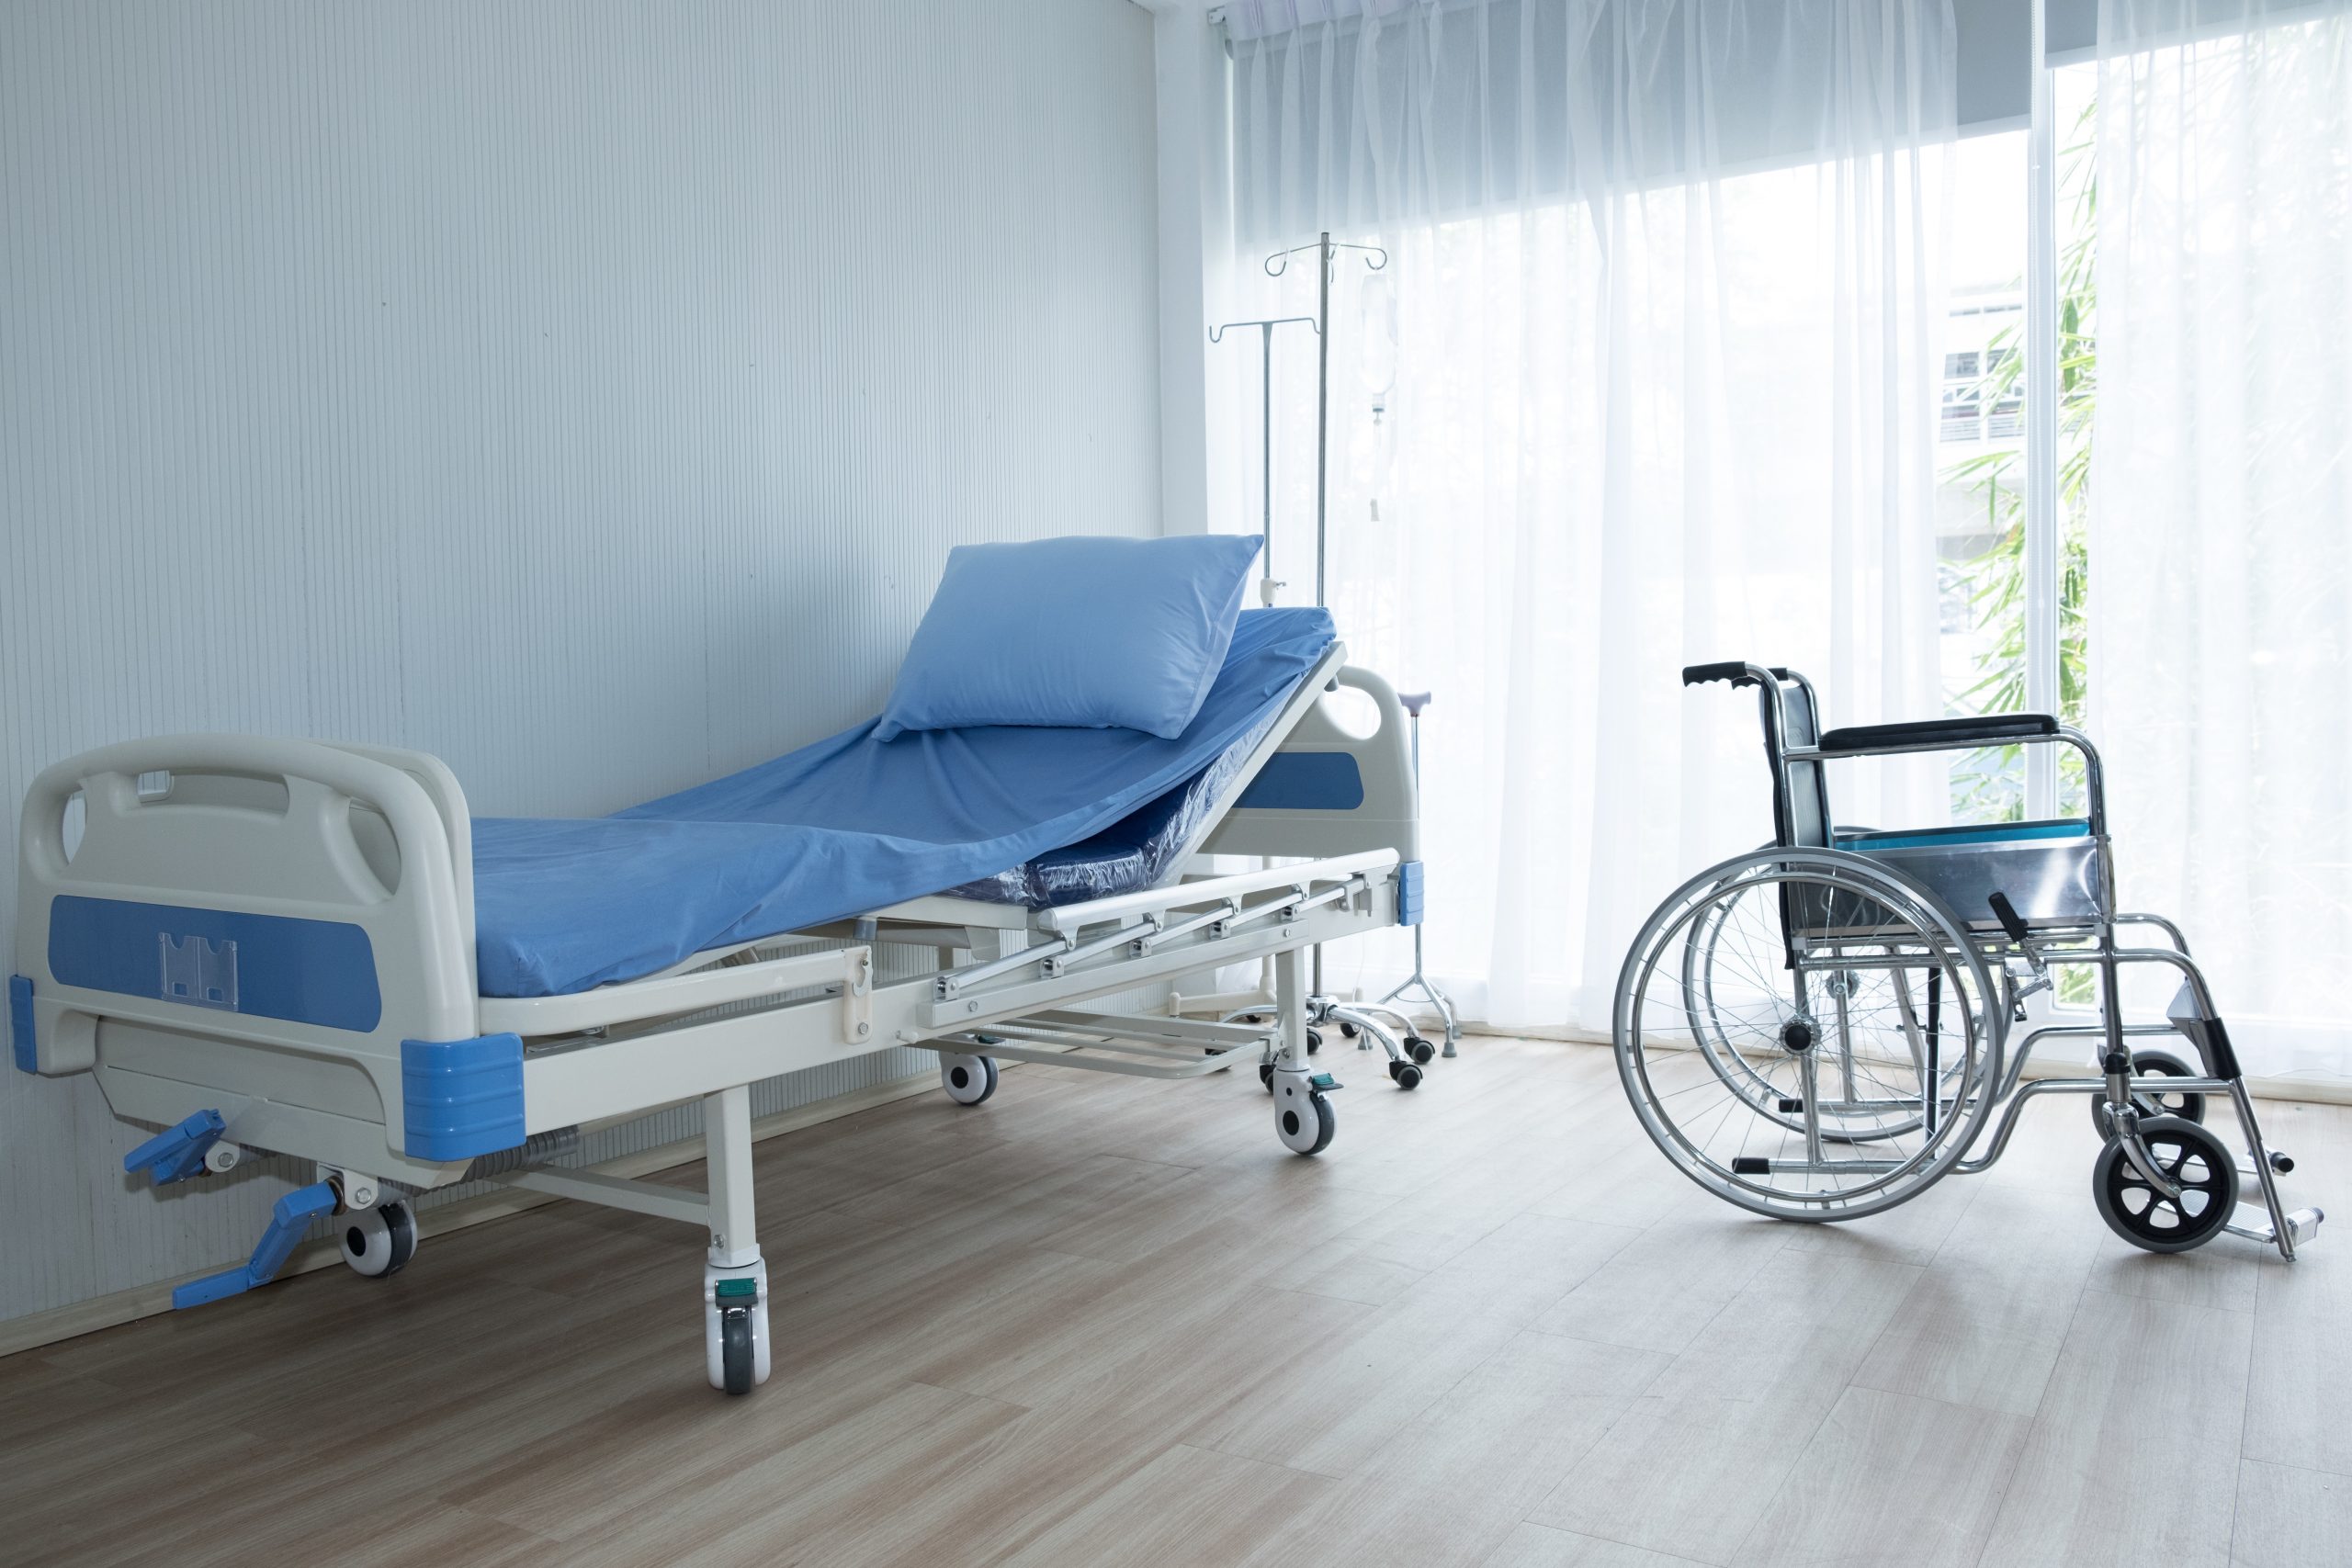 Wheelchair and patient bed in the room of hospital